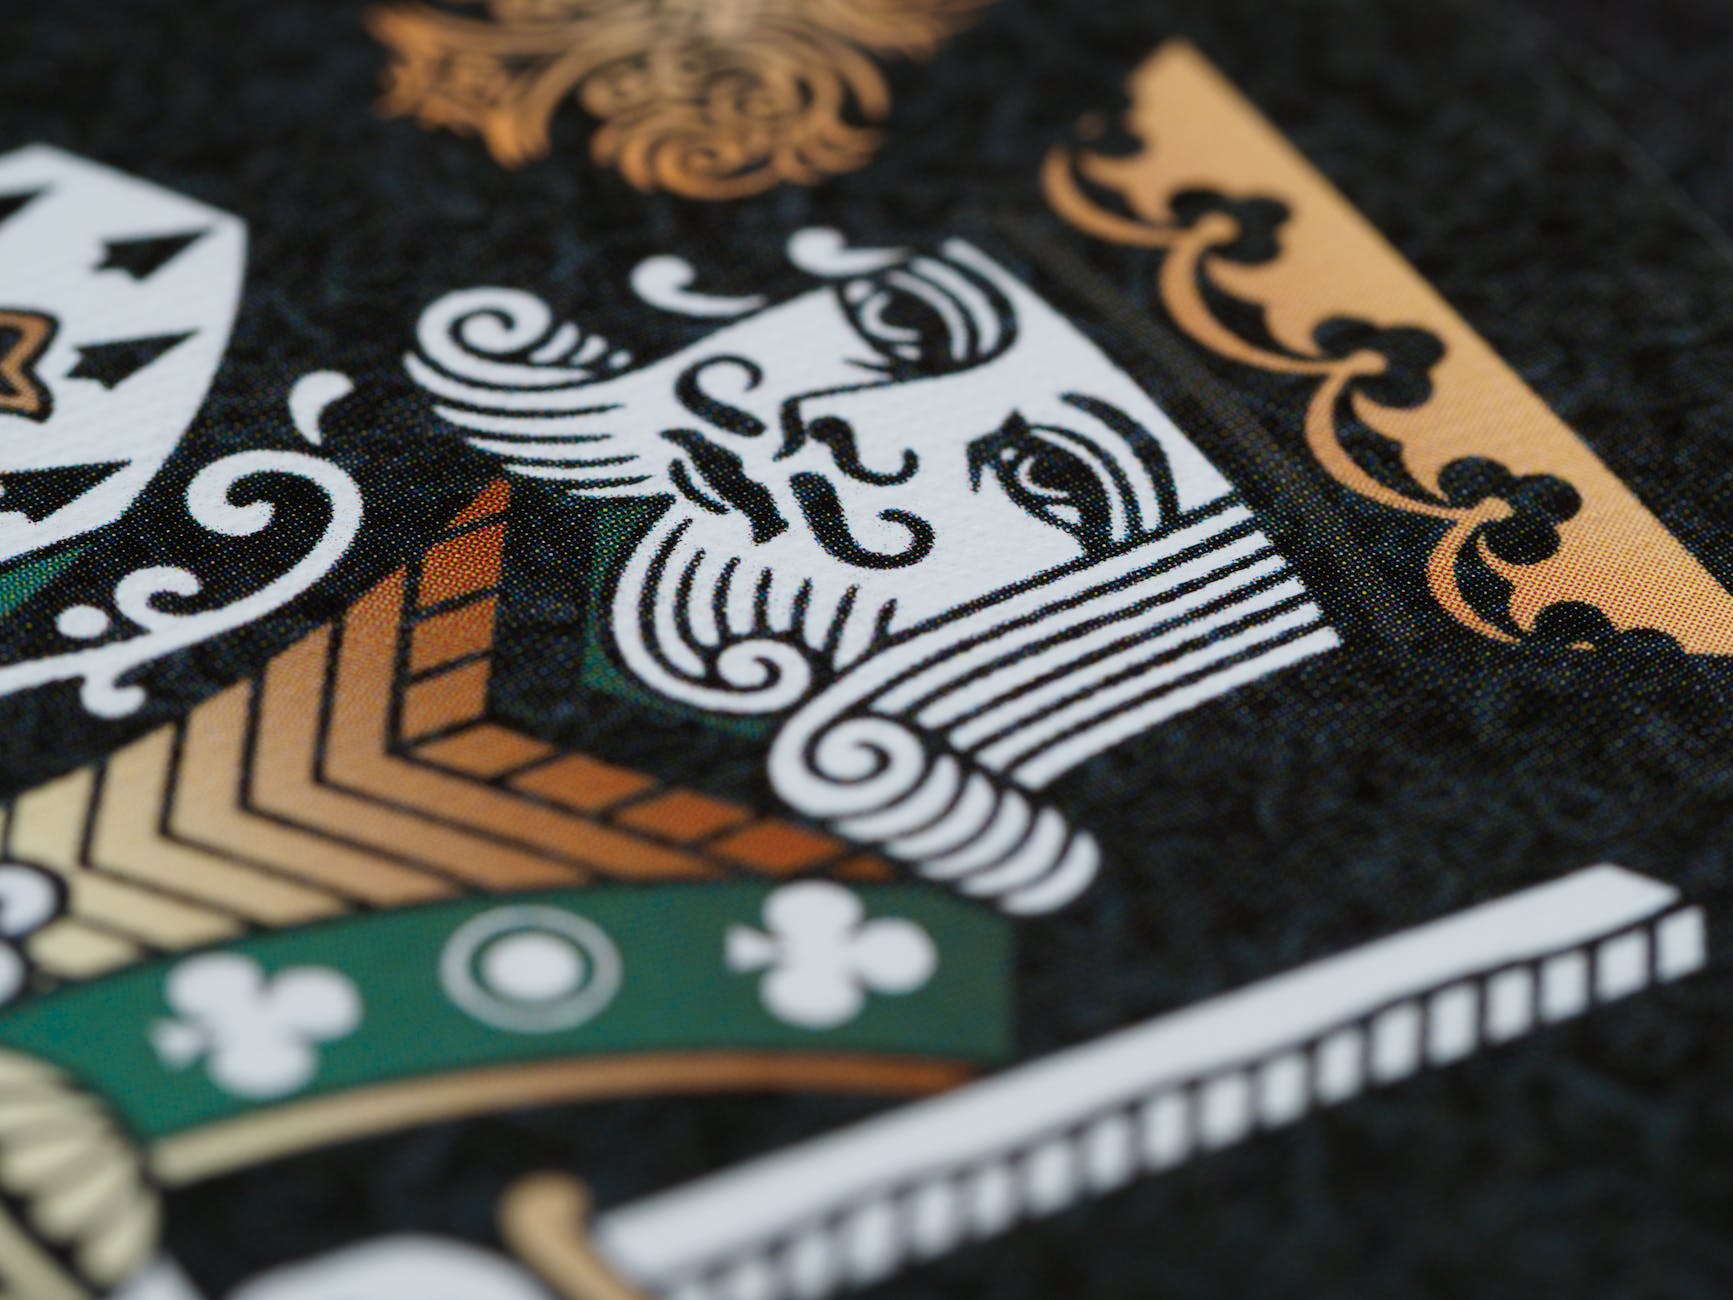 close up shot of a king playing card